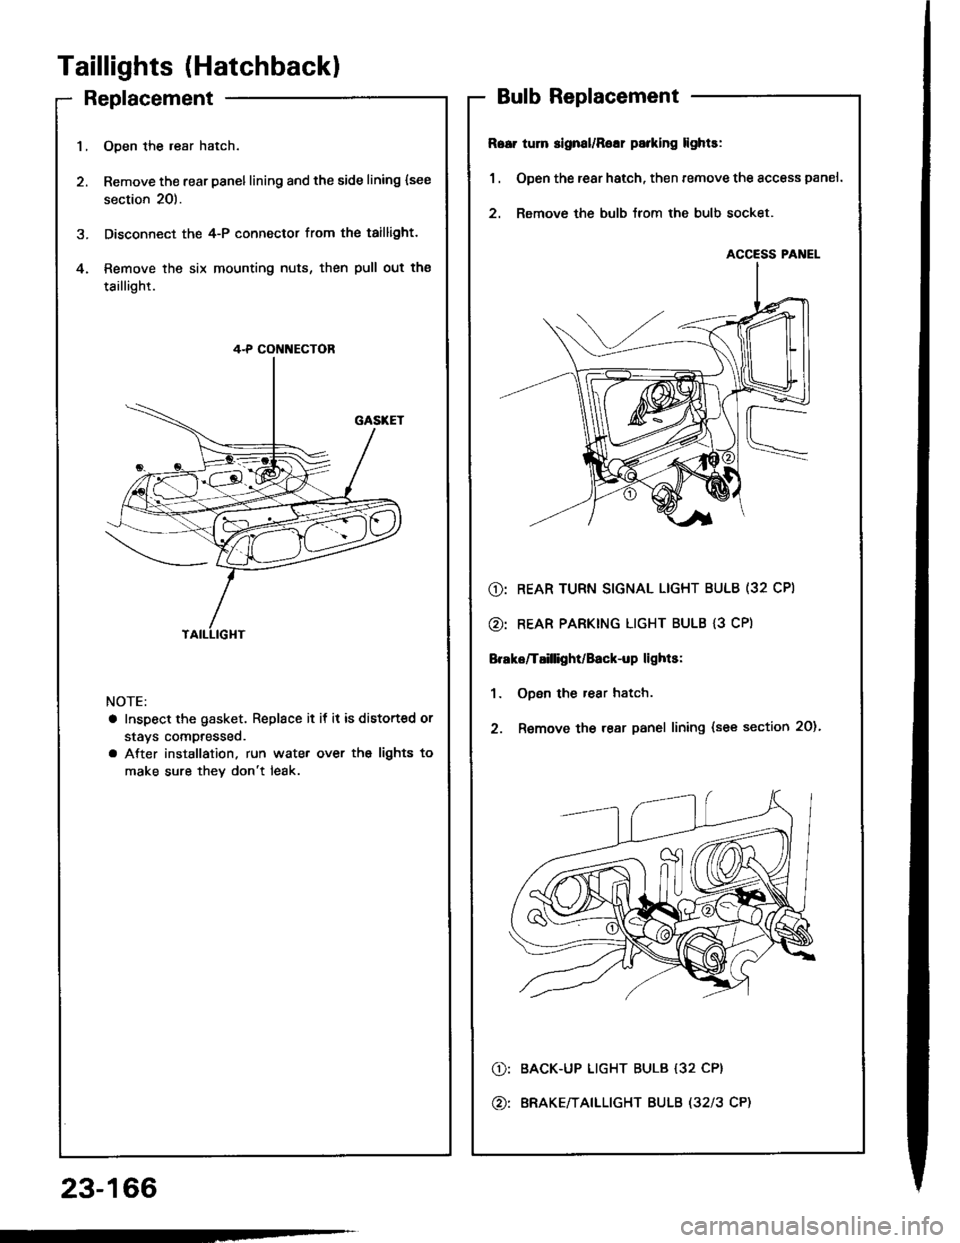 HONDA INTEGRA 1994 4.G Workshop Manual -
Taillights (Hatchbackl
Replacement
23-166
1.Open the resr hatch.
Remove the rear panellining and the side lining {see
section 20).
Disconnect the 4-P connector from the taillight.
Remove the six mou